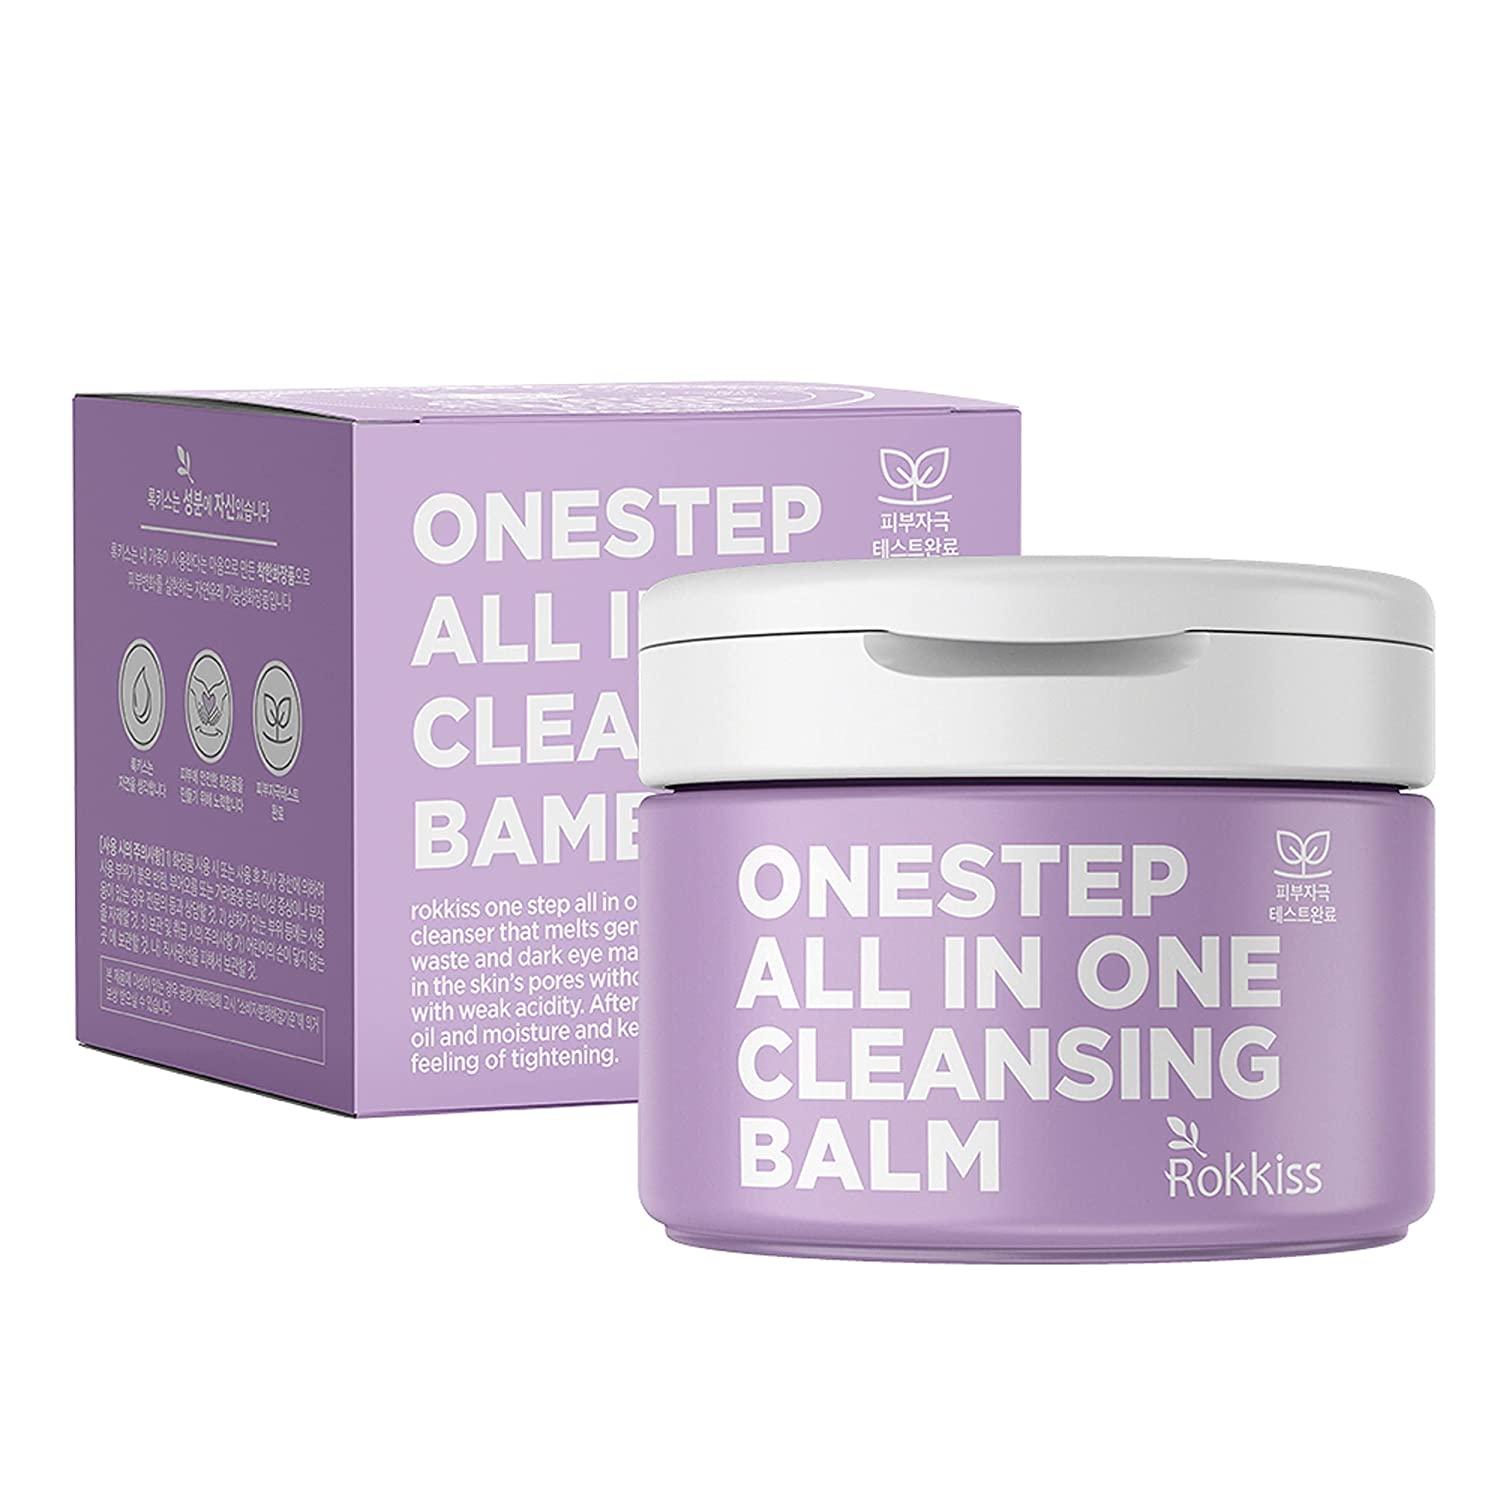 One Step All In One Cleansing Balm